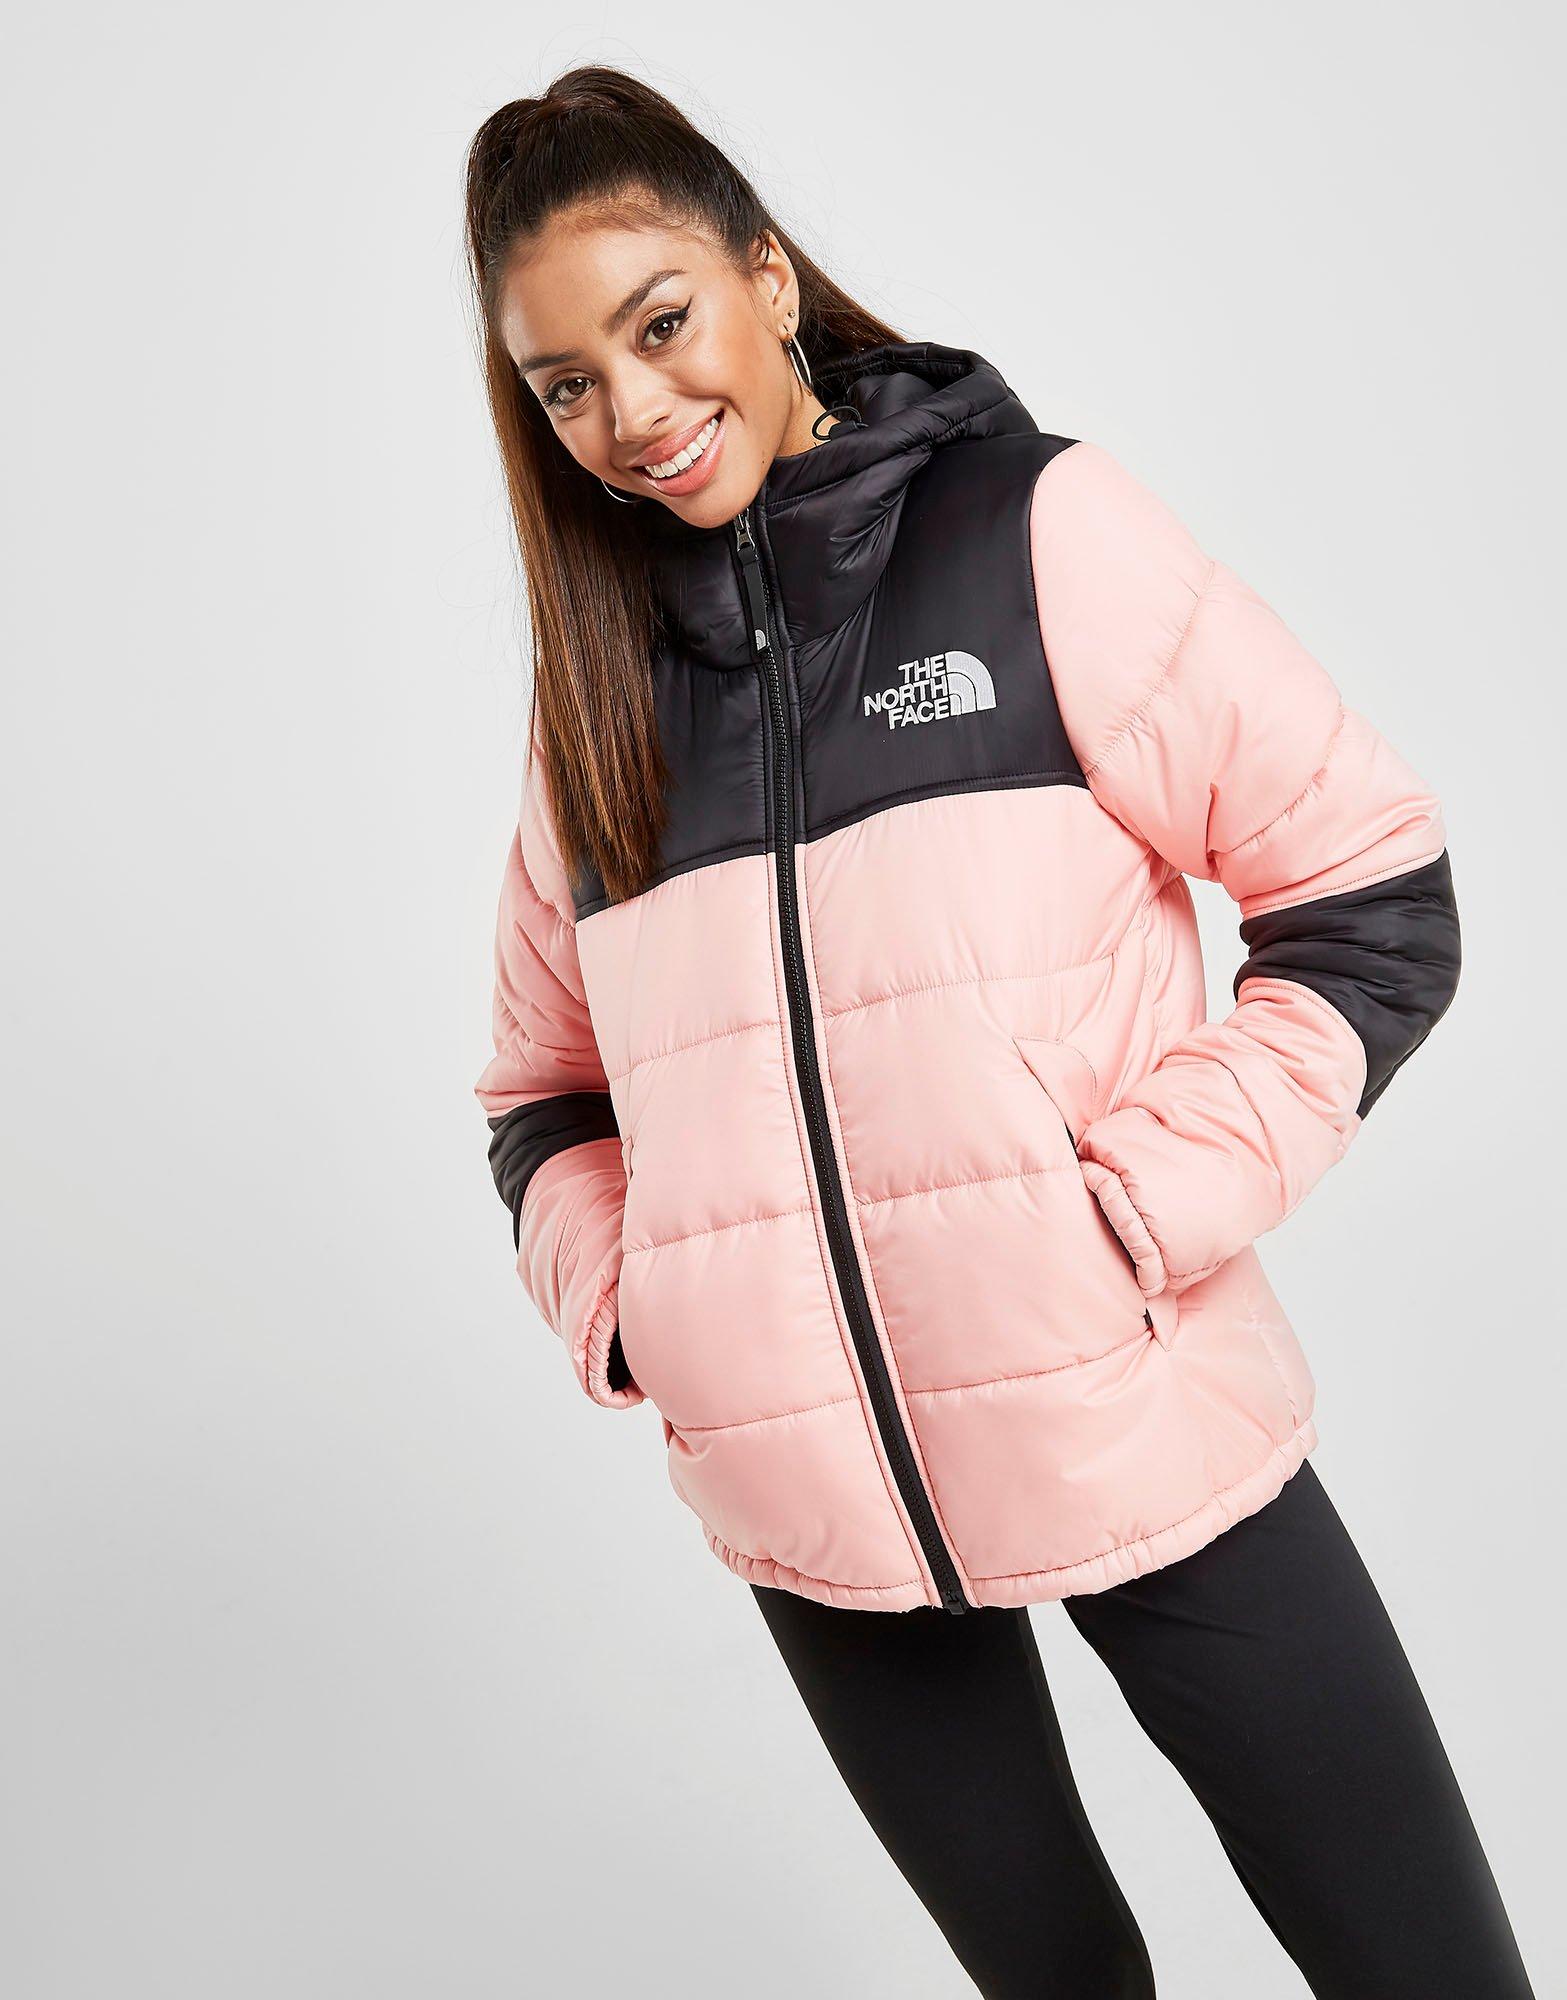 north face panel wind jacket pink